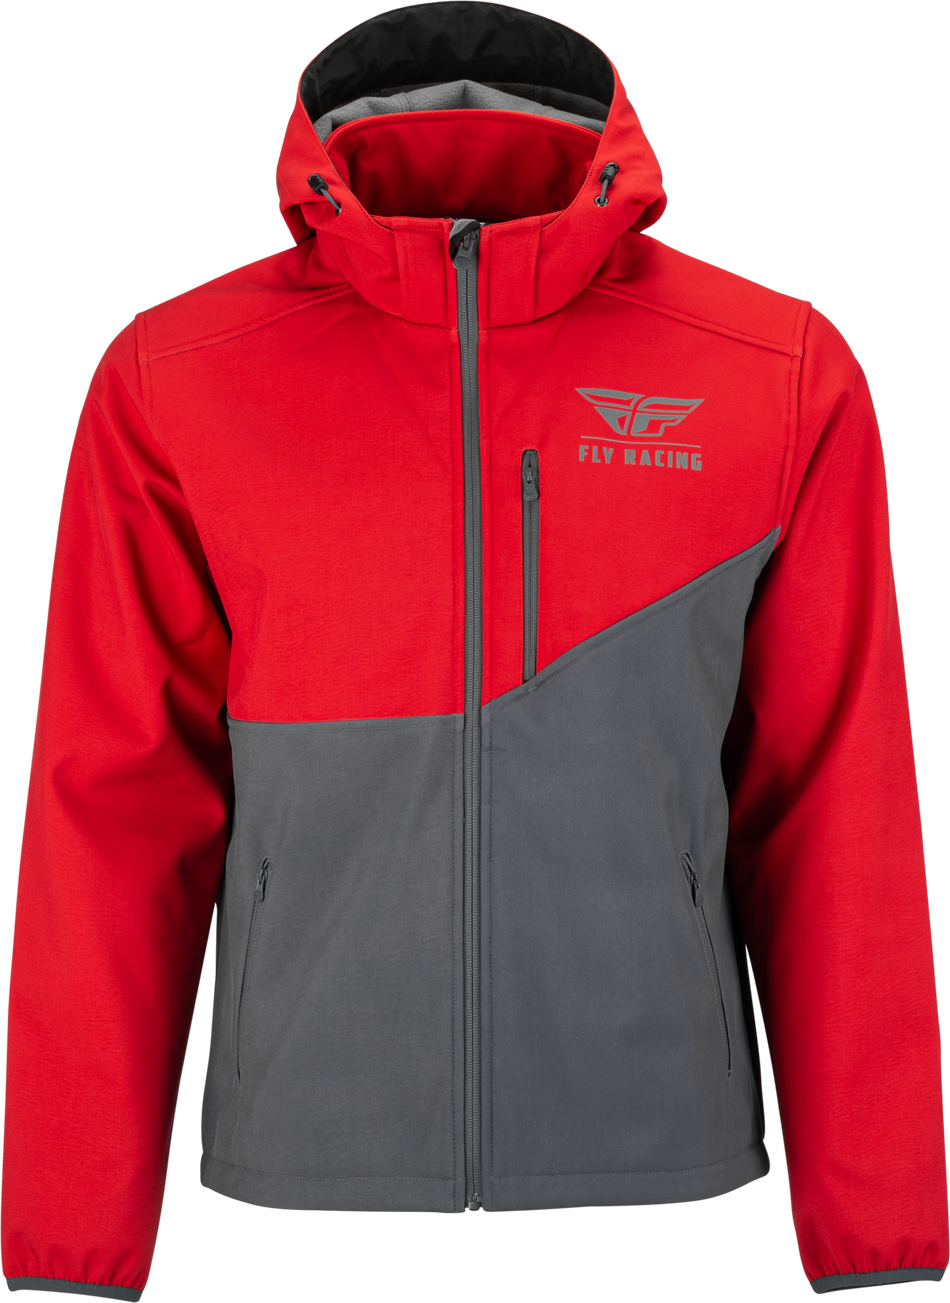 FLY RACING Checkpoint Jacket Grey/Red Xl 354-6384X